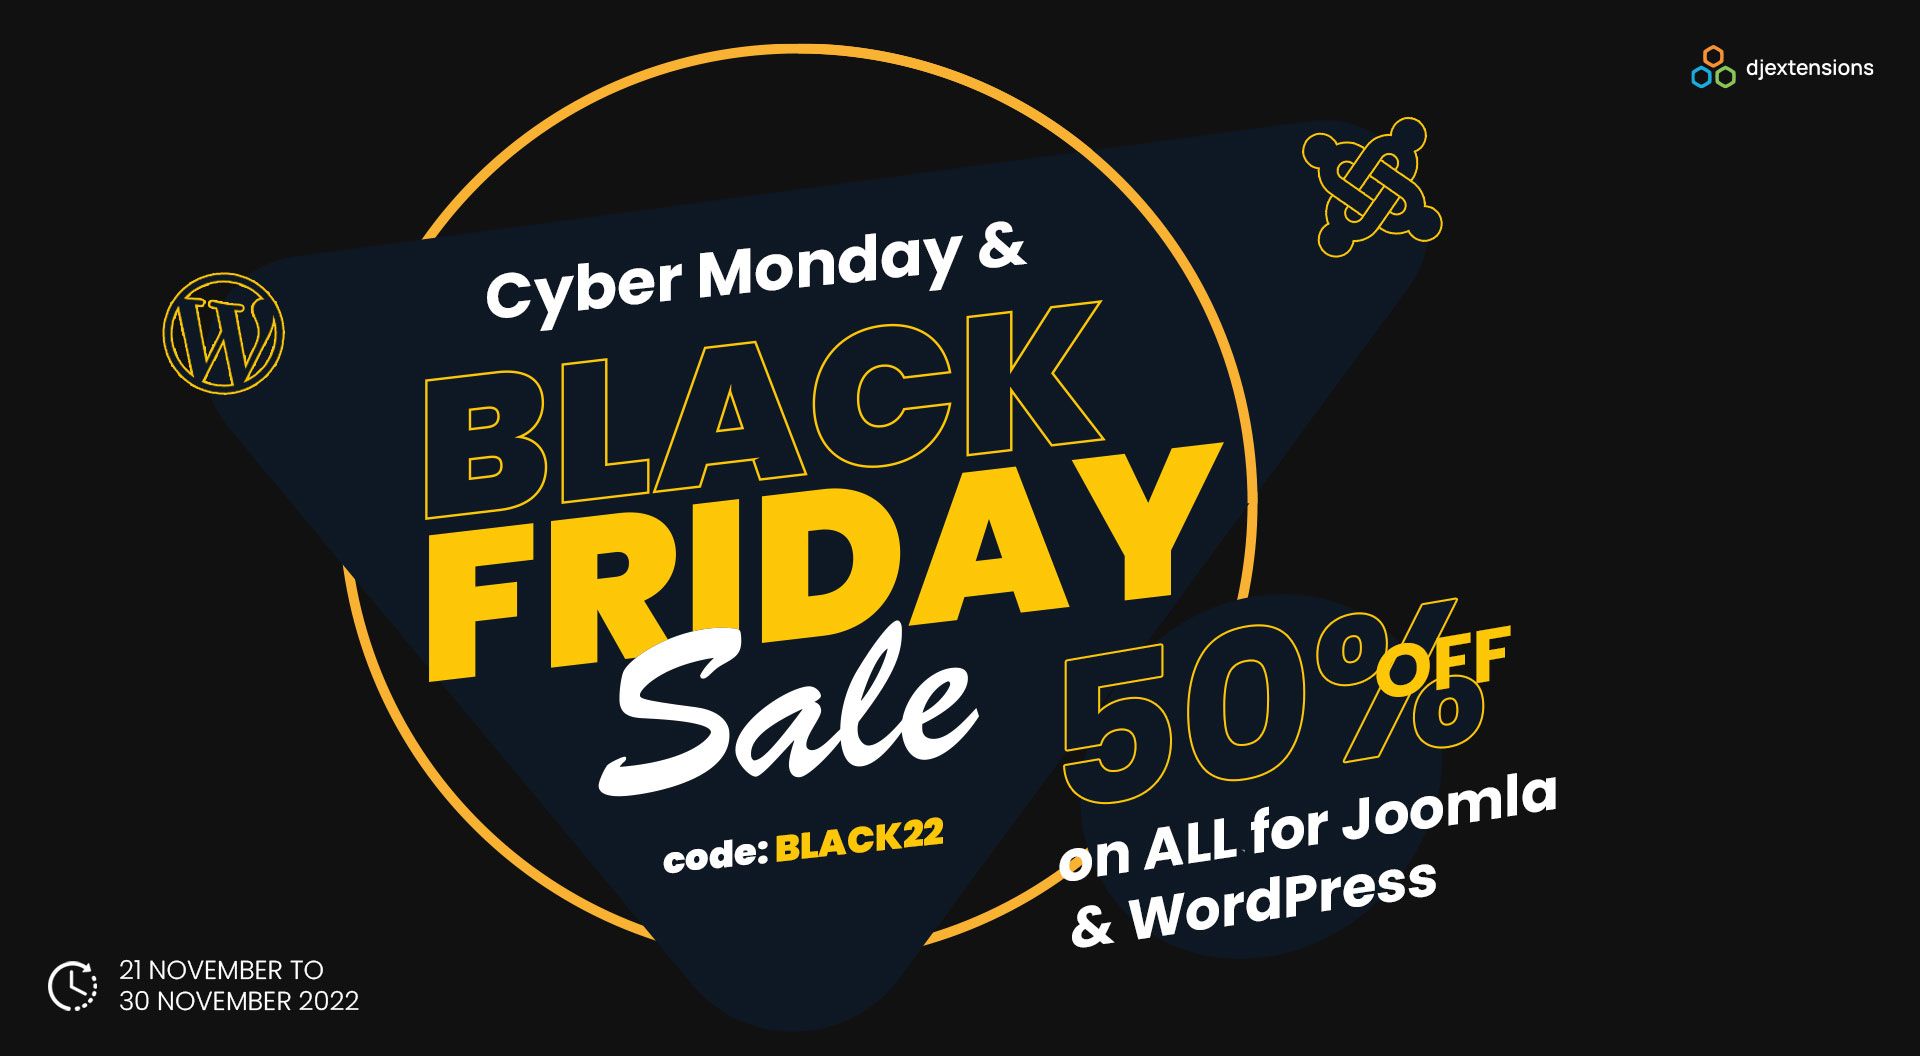 Black Friday Sale starts right now. Enjoy shopping - get all you need for Joomla and WordPress 50% OFF